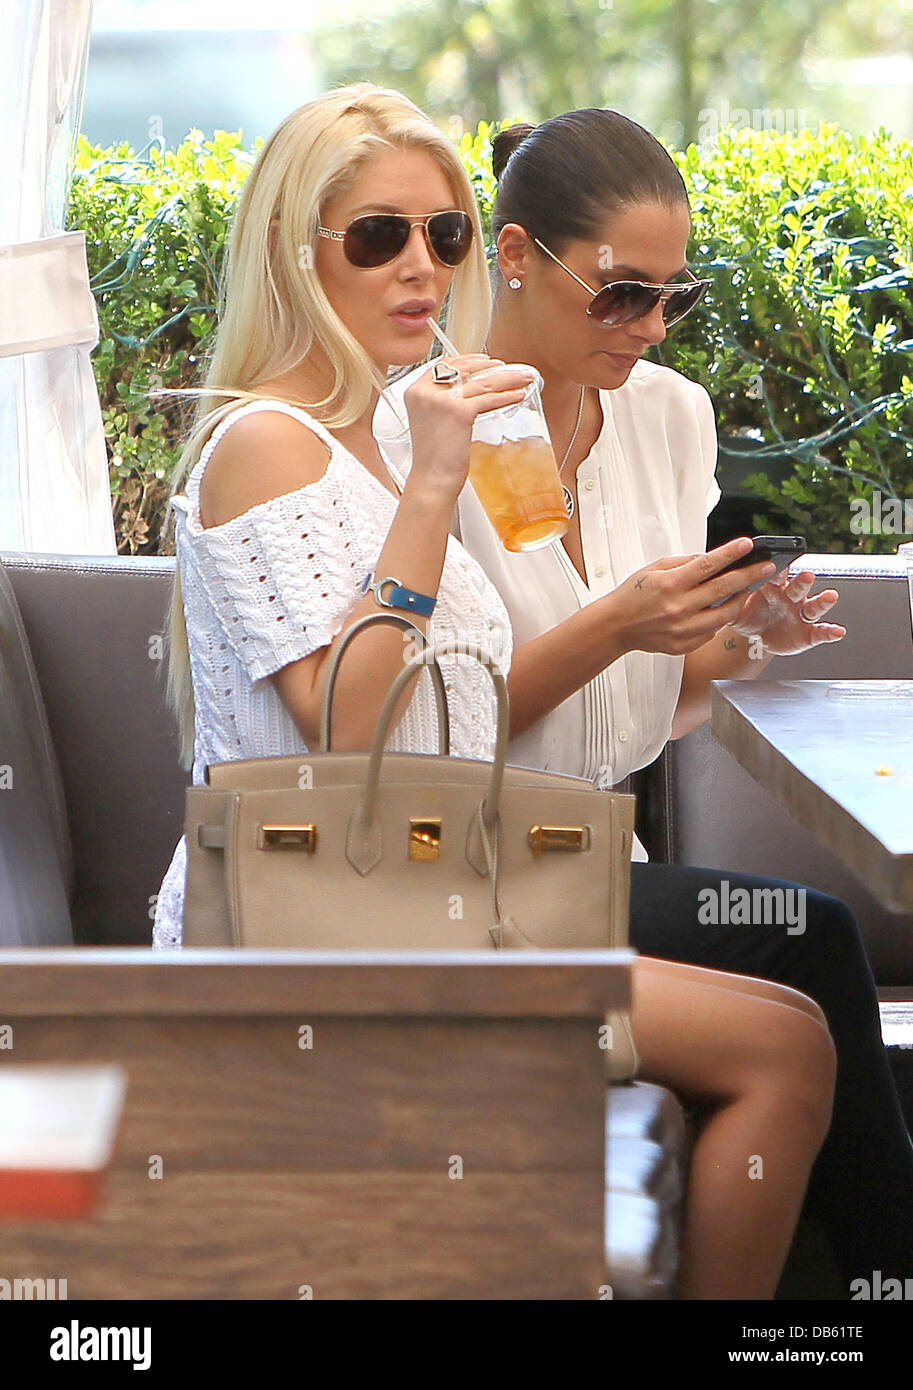 Heidi Montag and Ashley Dupre Heidi Montag drinking iced tea at Caffe Primo on Sunset Boulevard in West Hollywood. Los Angeles, California - 04.05.11 Stock Photo